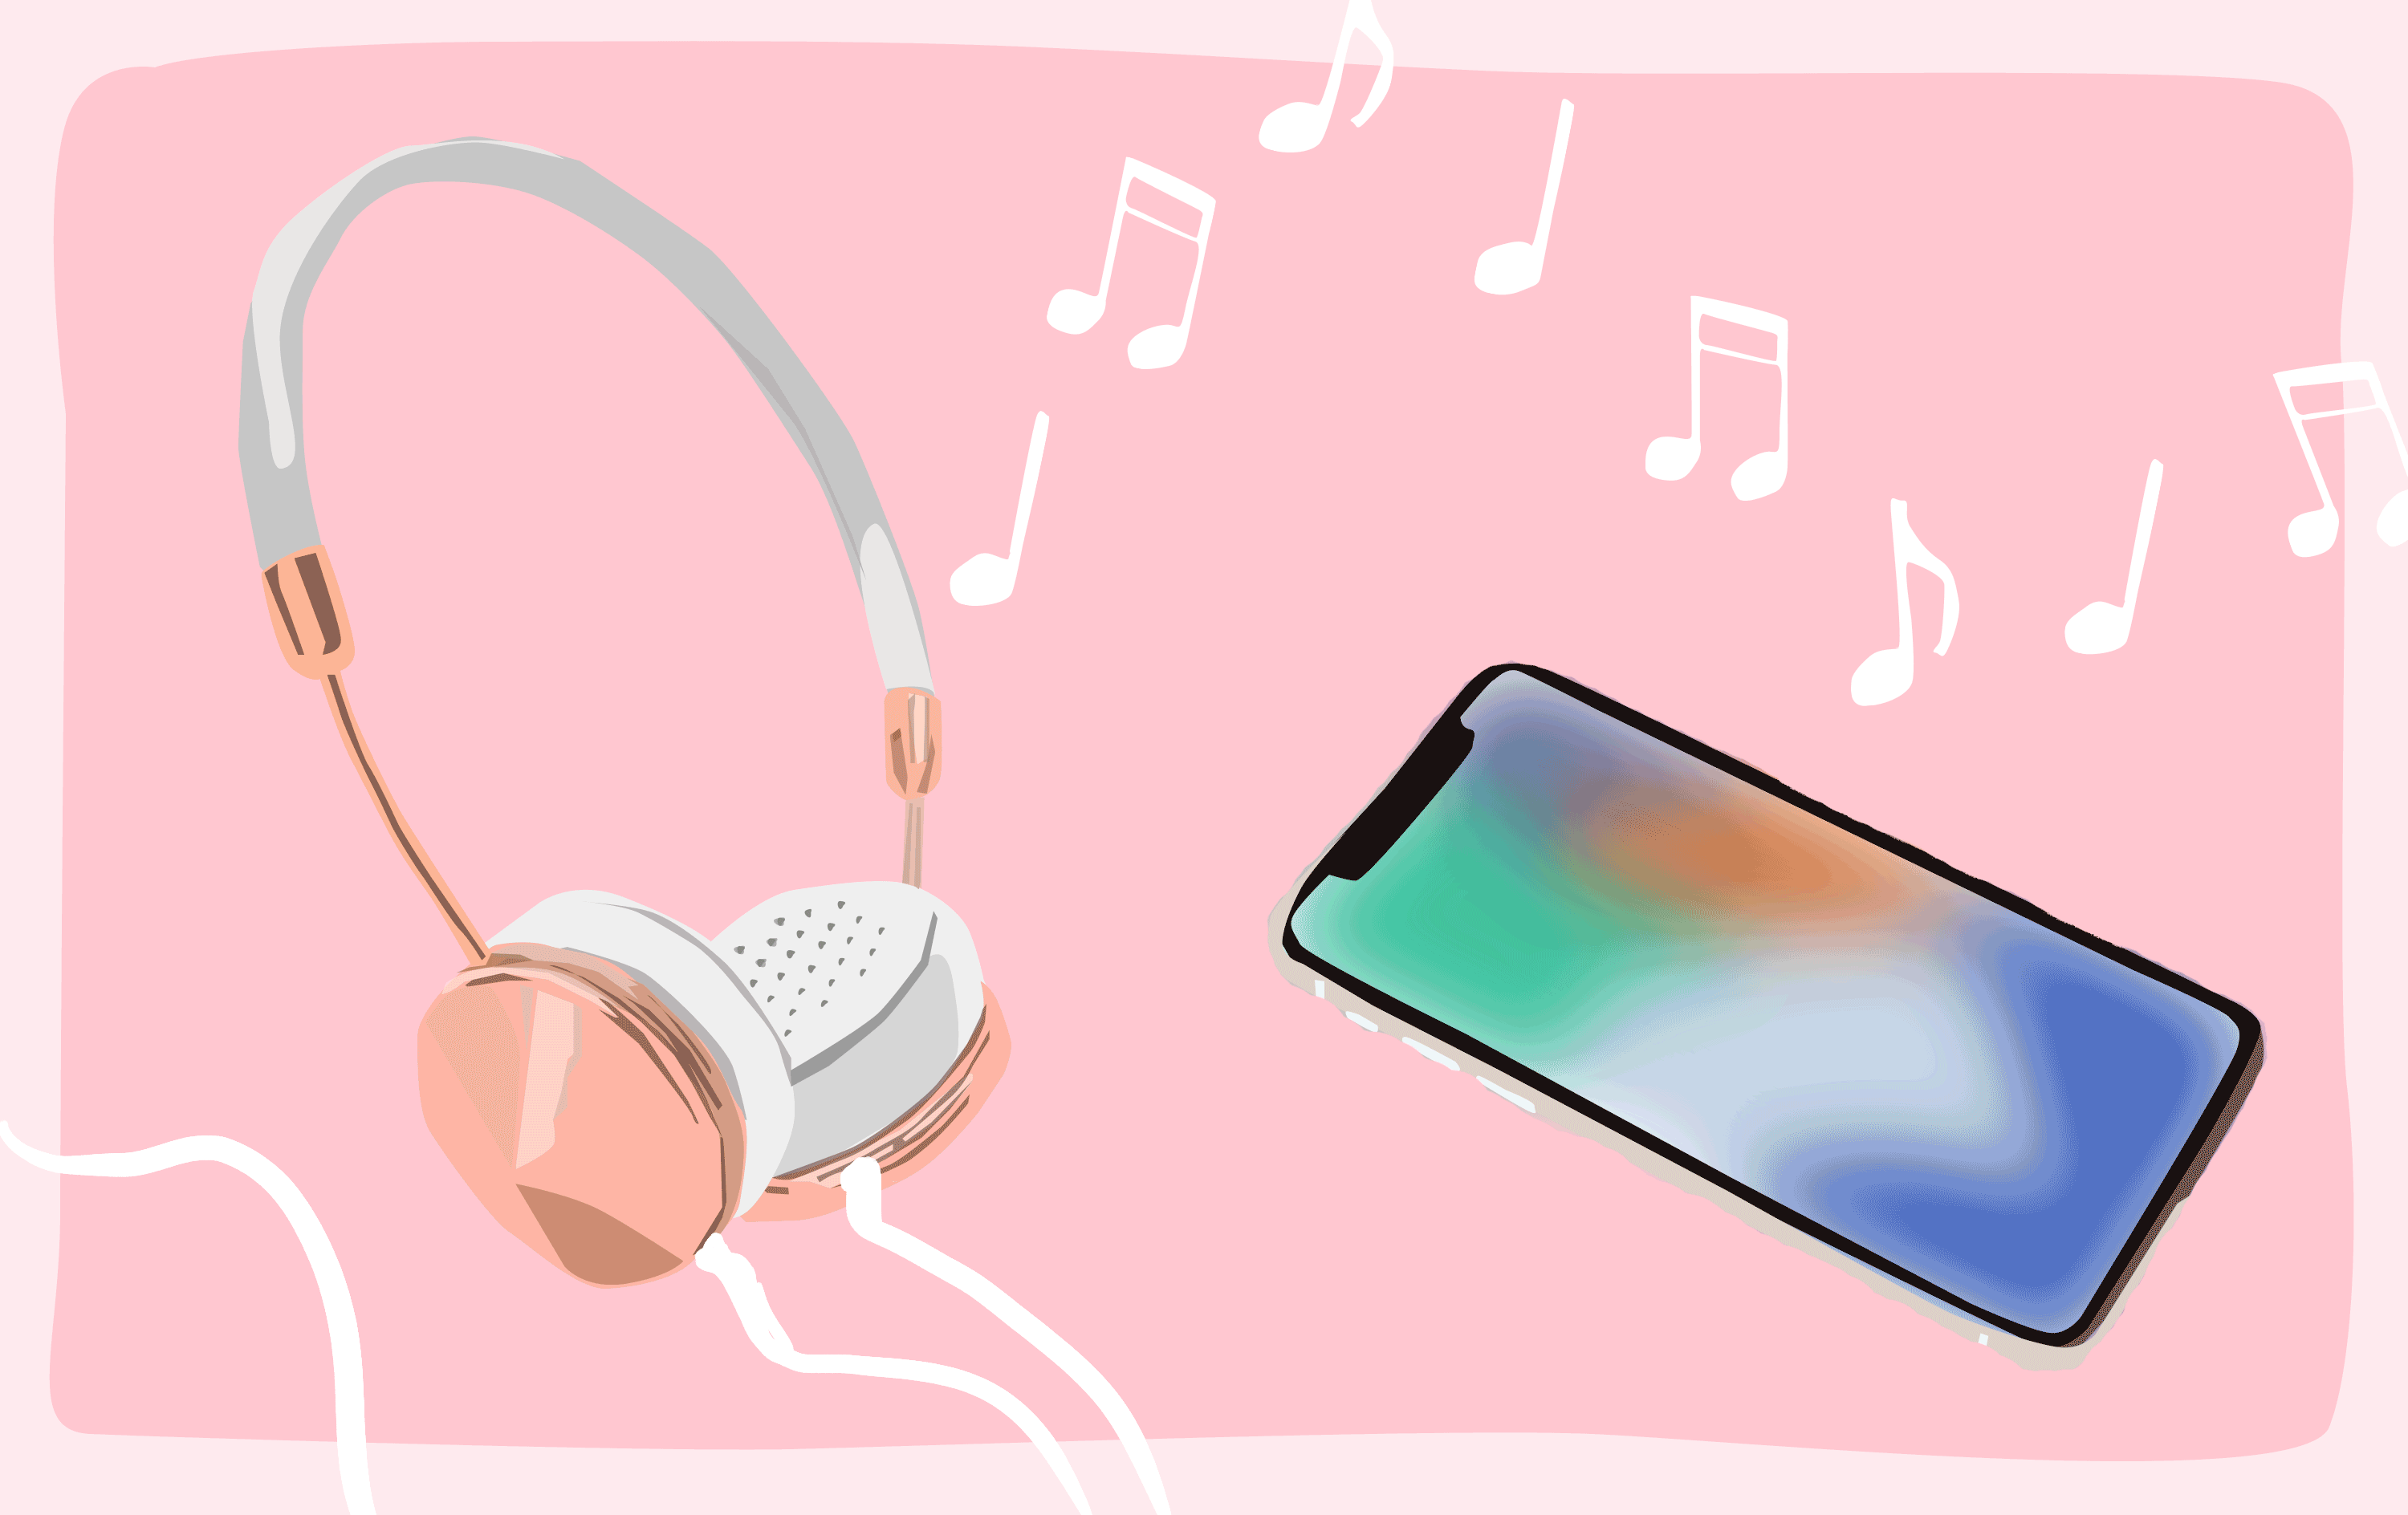 A phone and headphones.